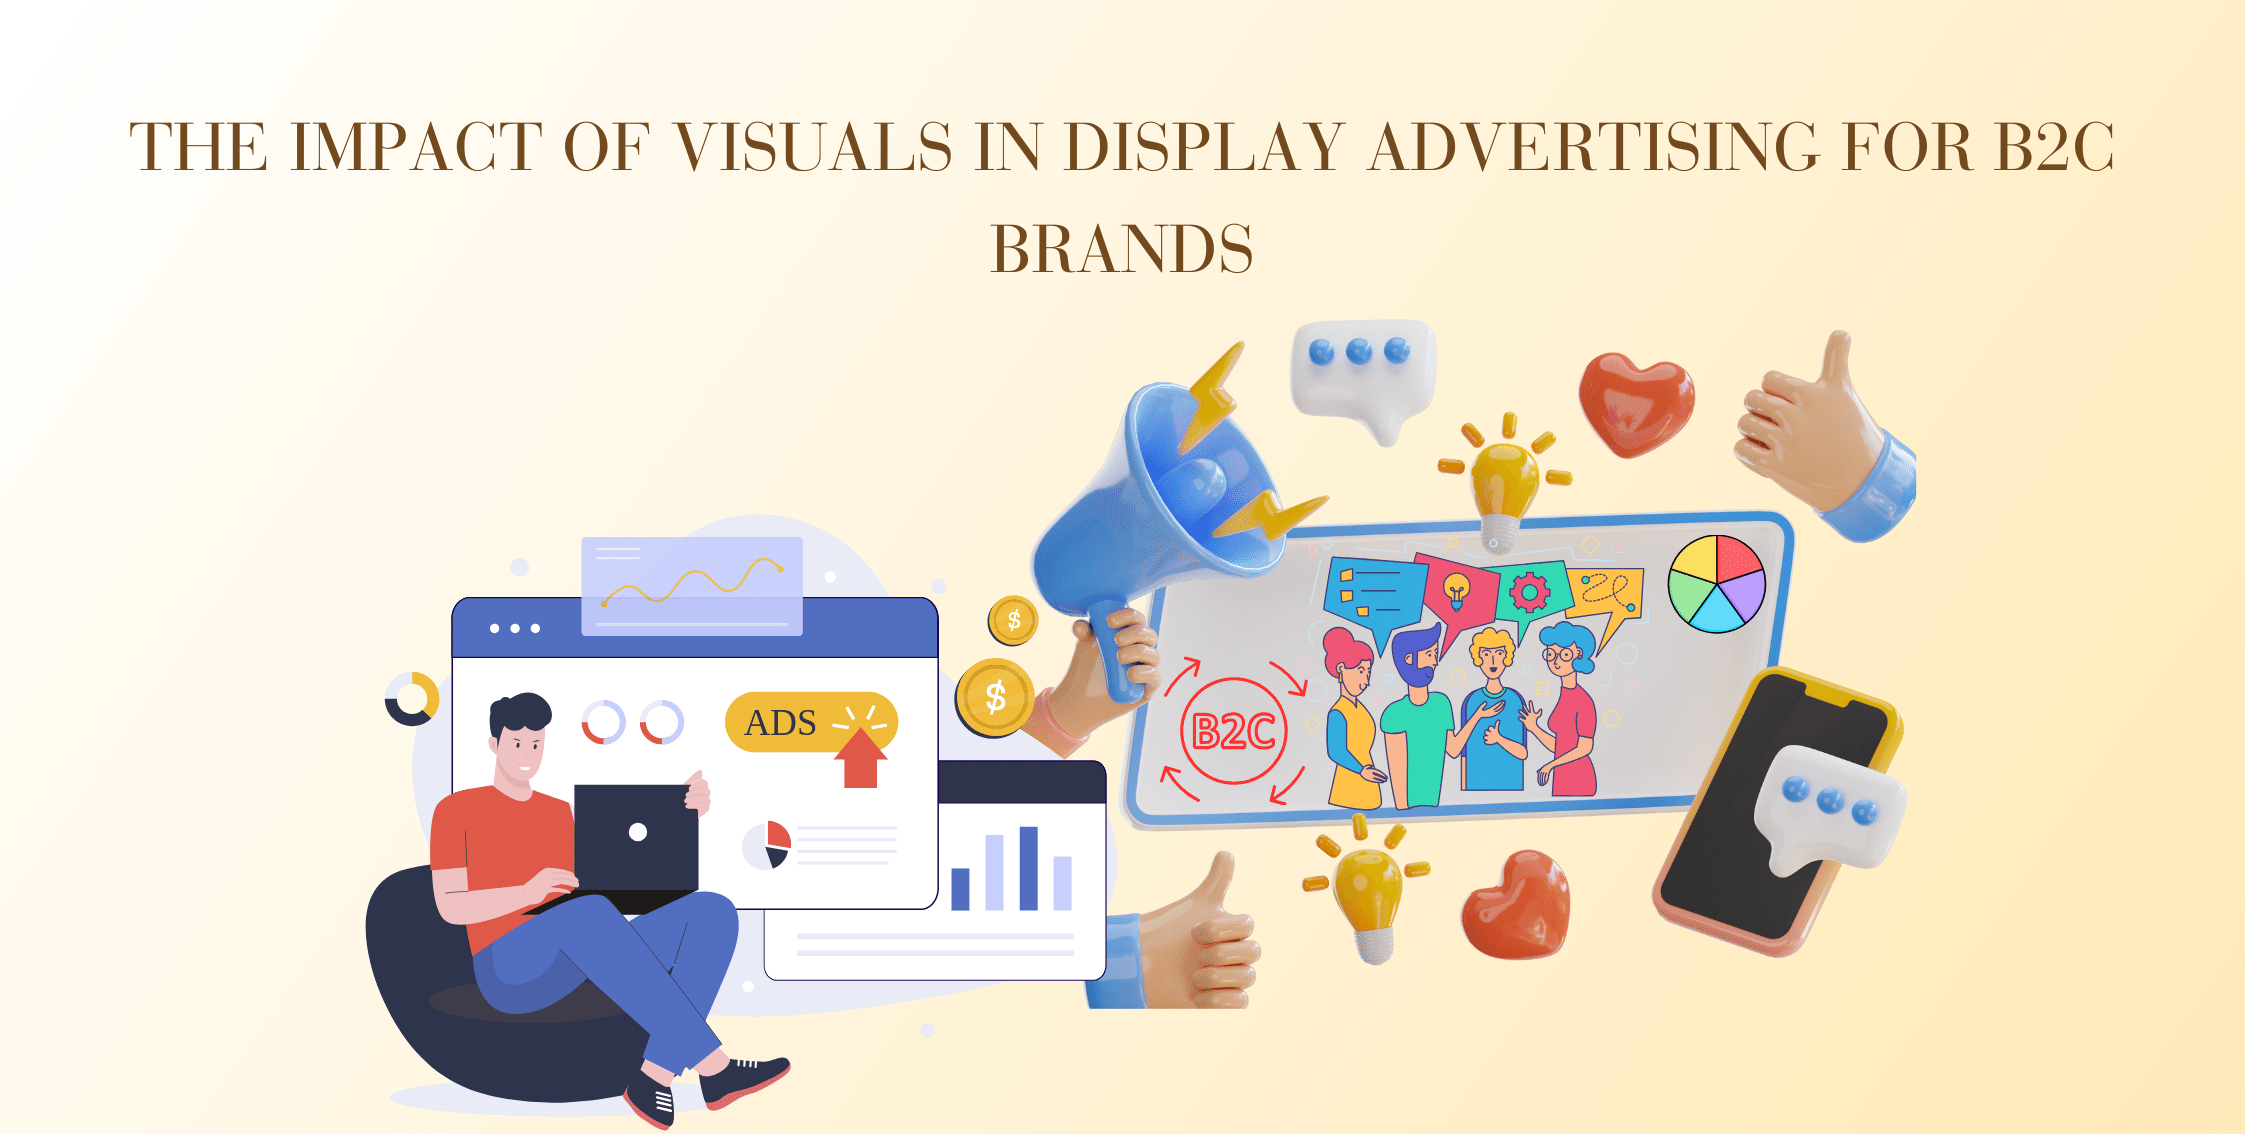 The Impact of Visuals in Display Advertising for B2C Brands